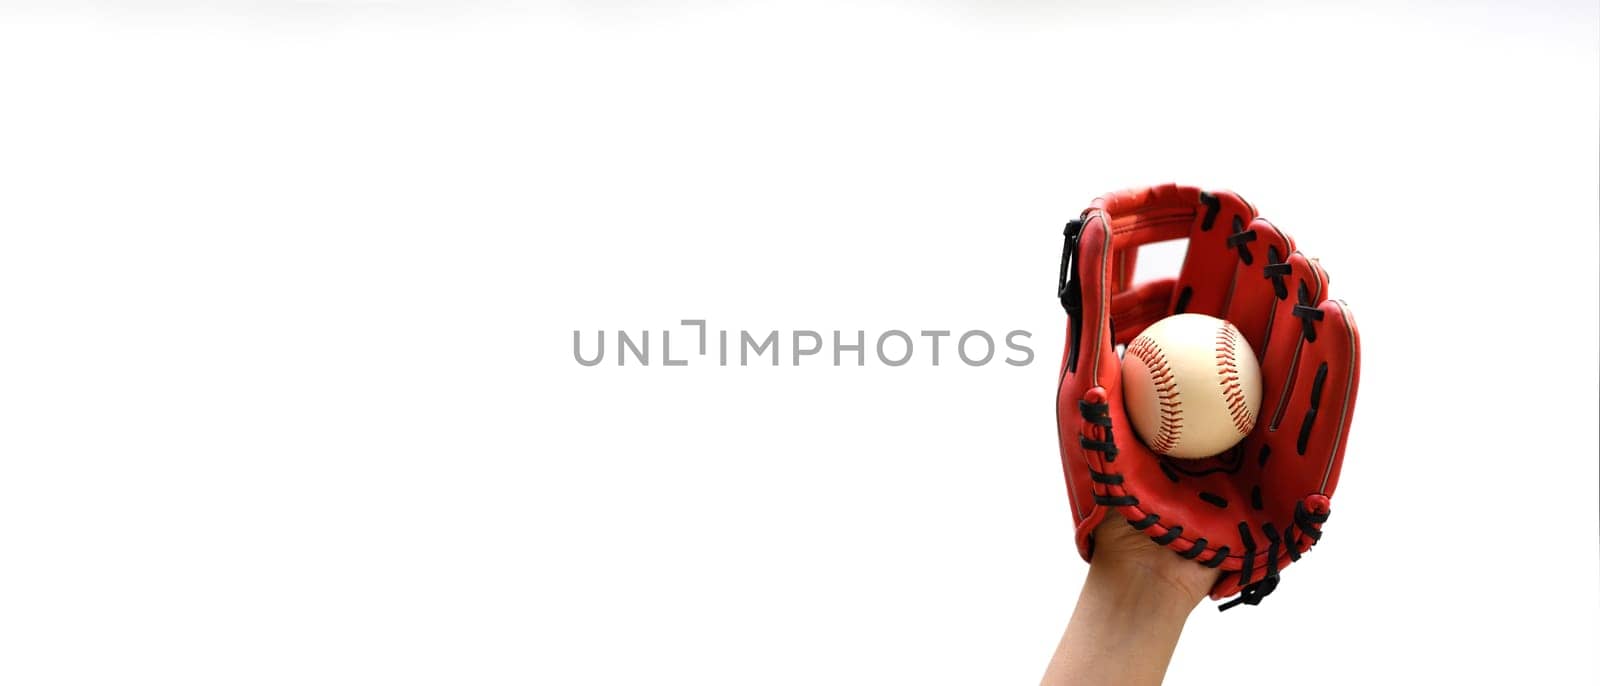 Hand with leather baseball glove and ball on white background. Fitness, sports and training concept by prathanchorruangsak